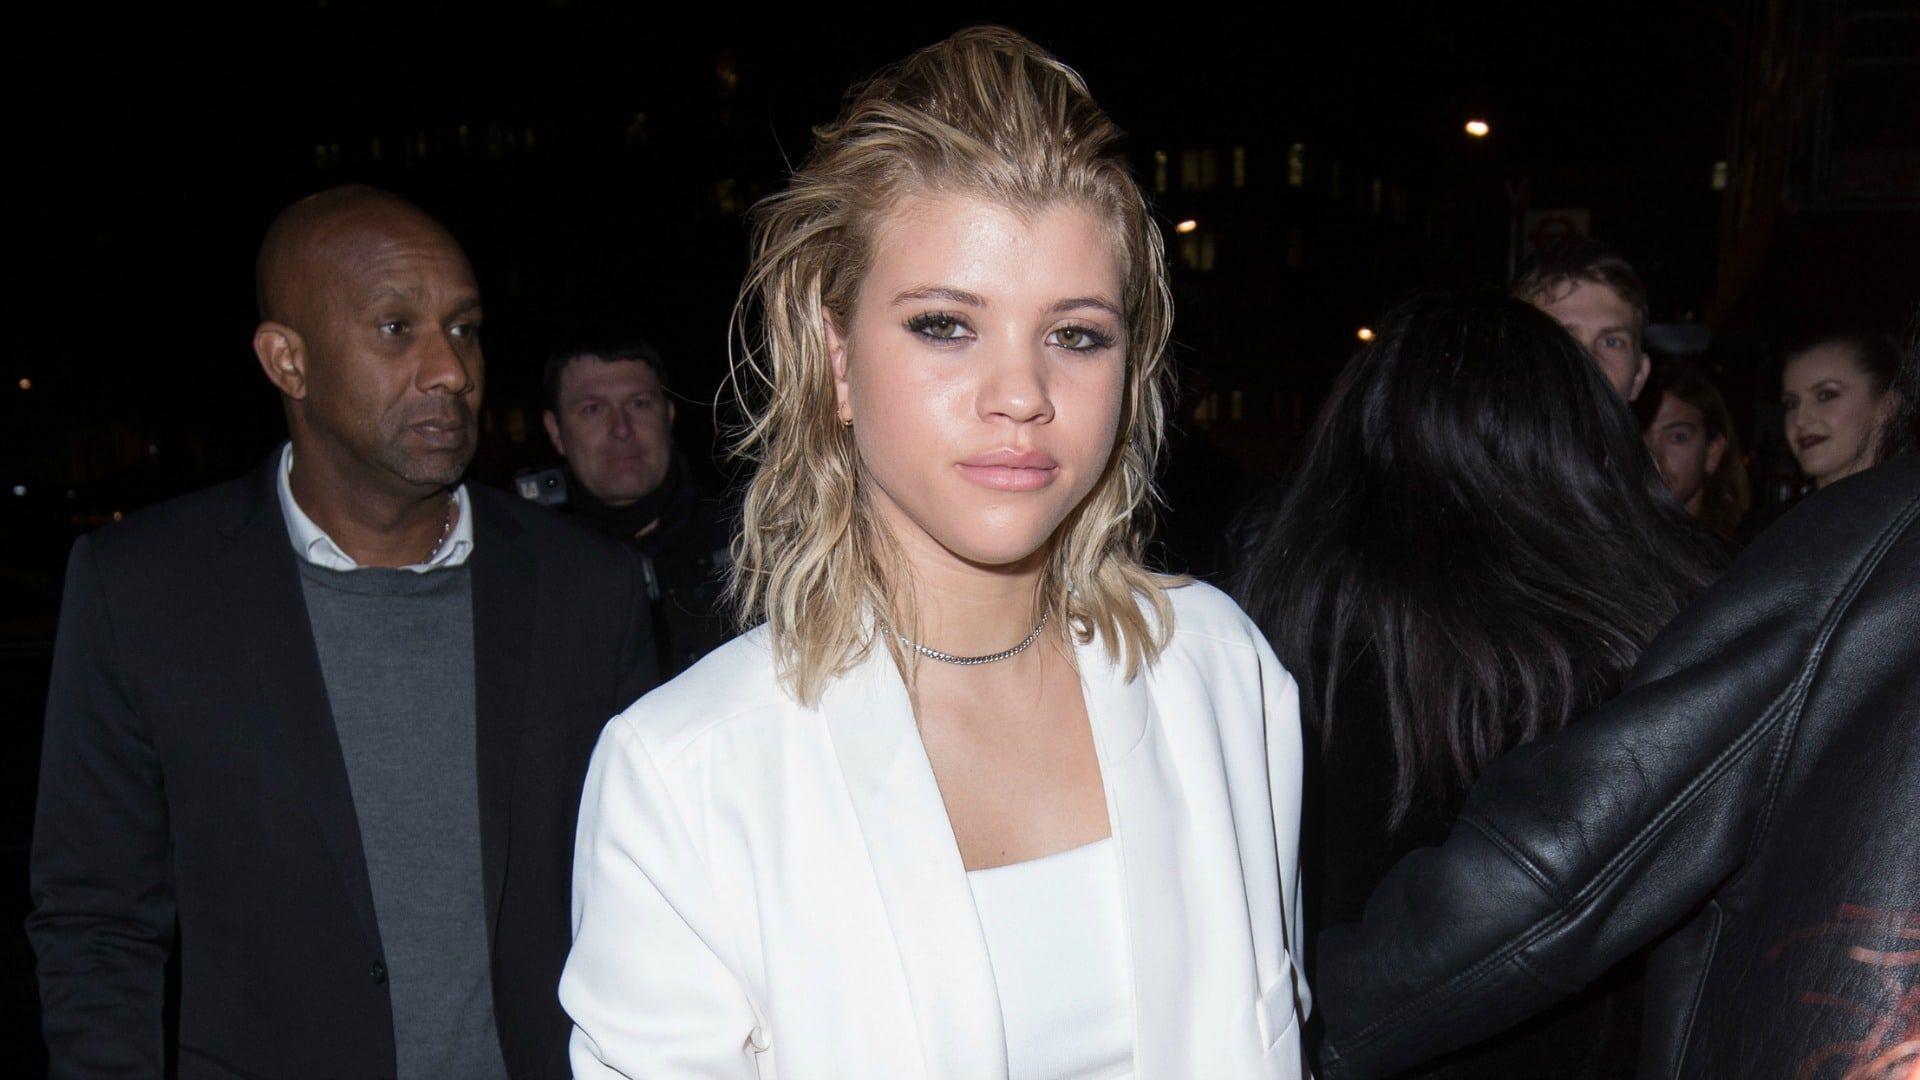 Sofia Richie & Scott Disick Aren't Dating, Guys, so You Can Chill Out